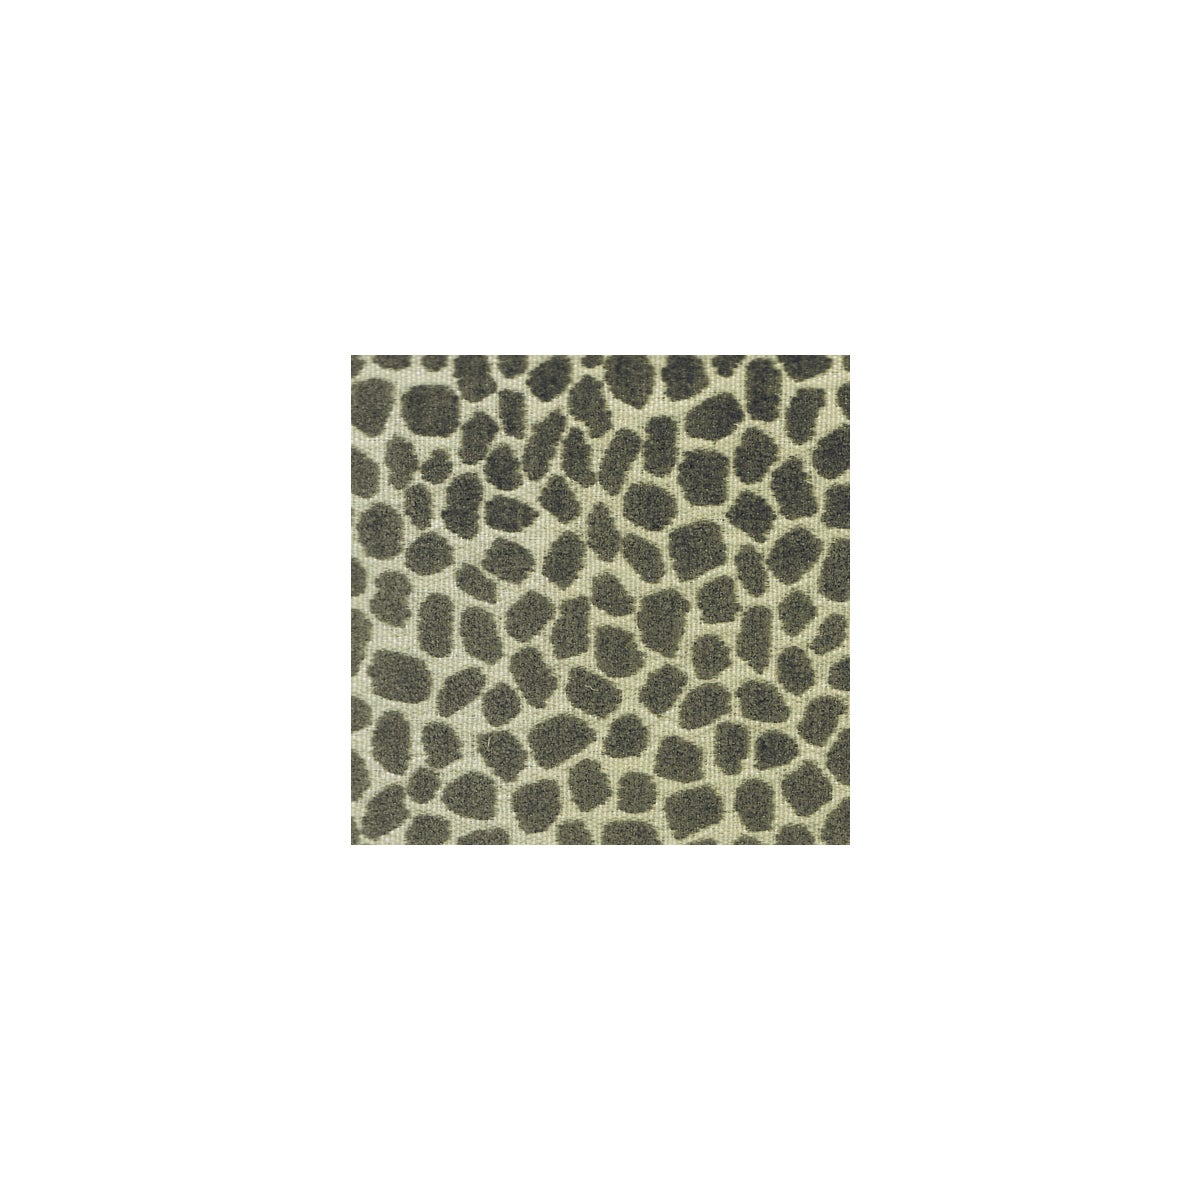 Togo * - Pebble - Fabric By the Yard